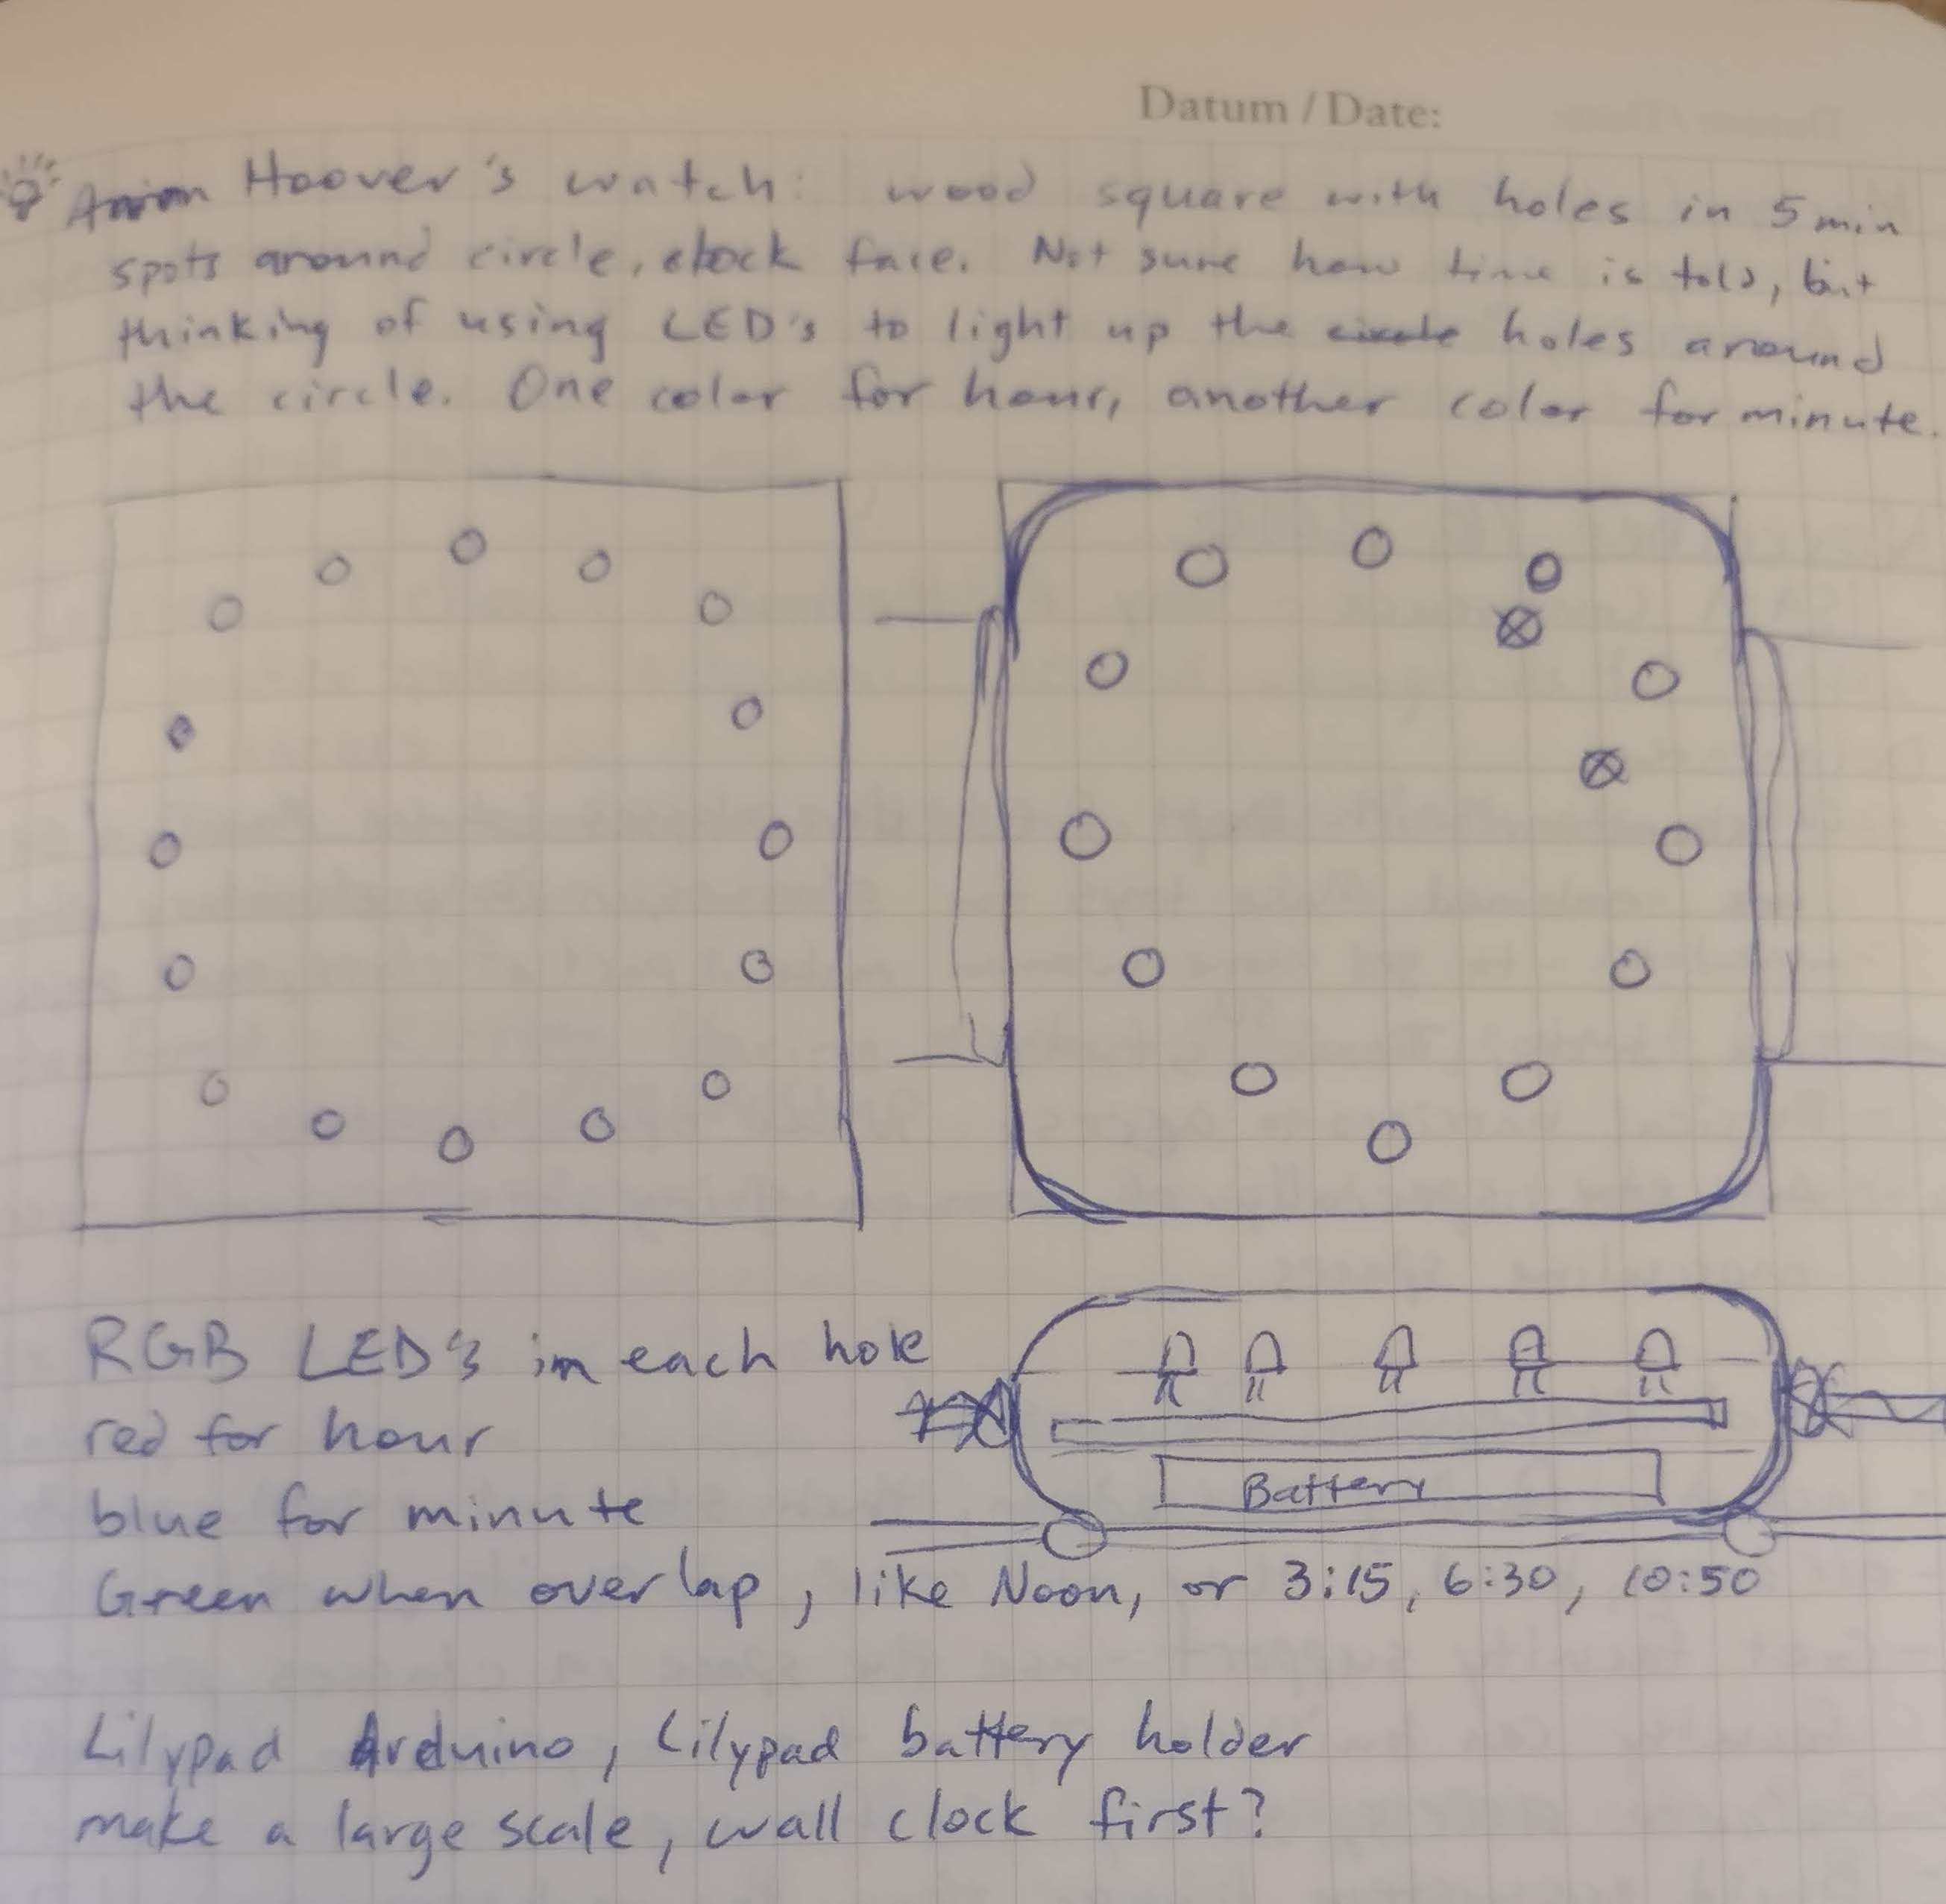 First sketch of LED watch in November 2016